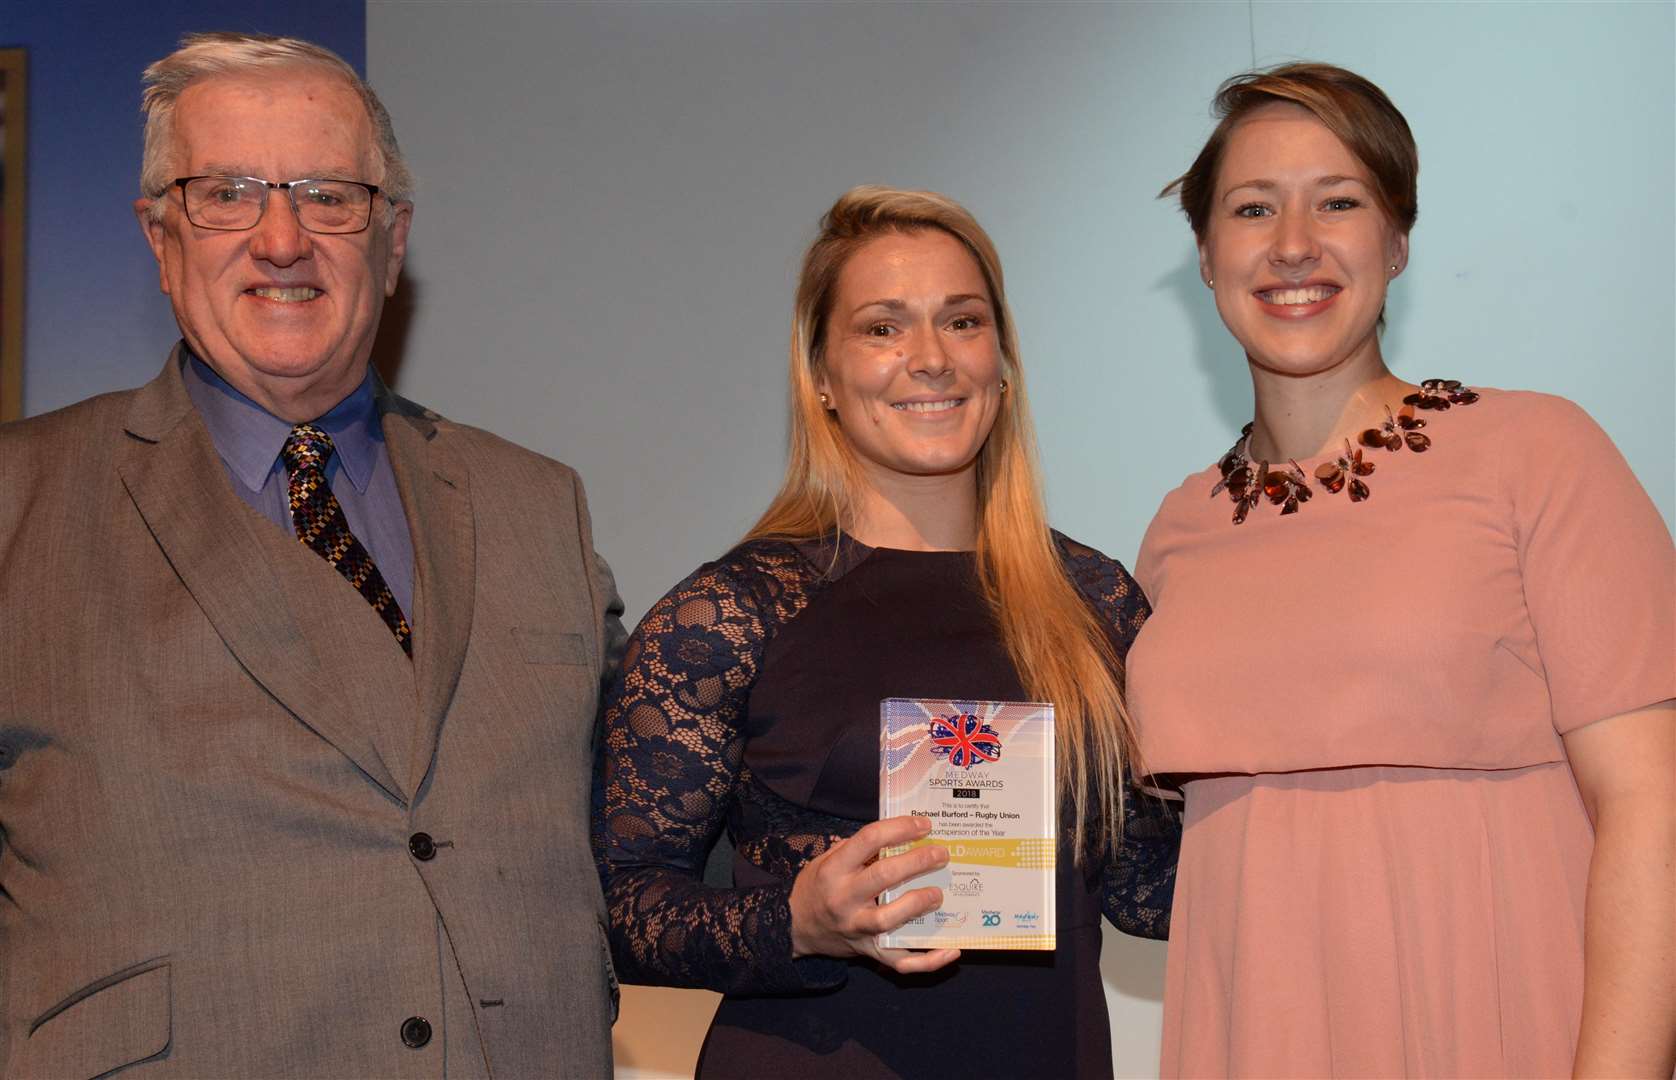 Rachael Burford collects her Sportsperson of the year award at the Medway Sports Awards. Picture: Chris Davey